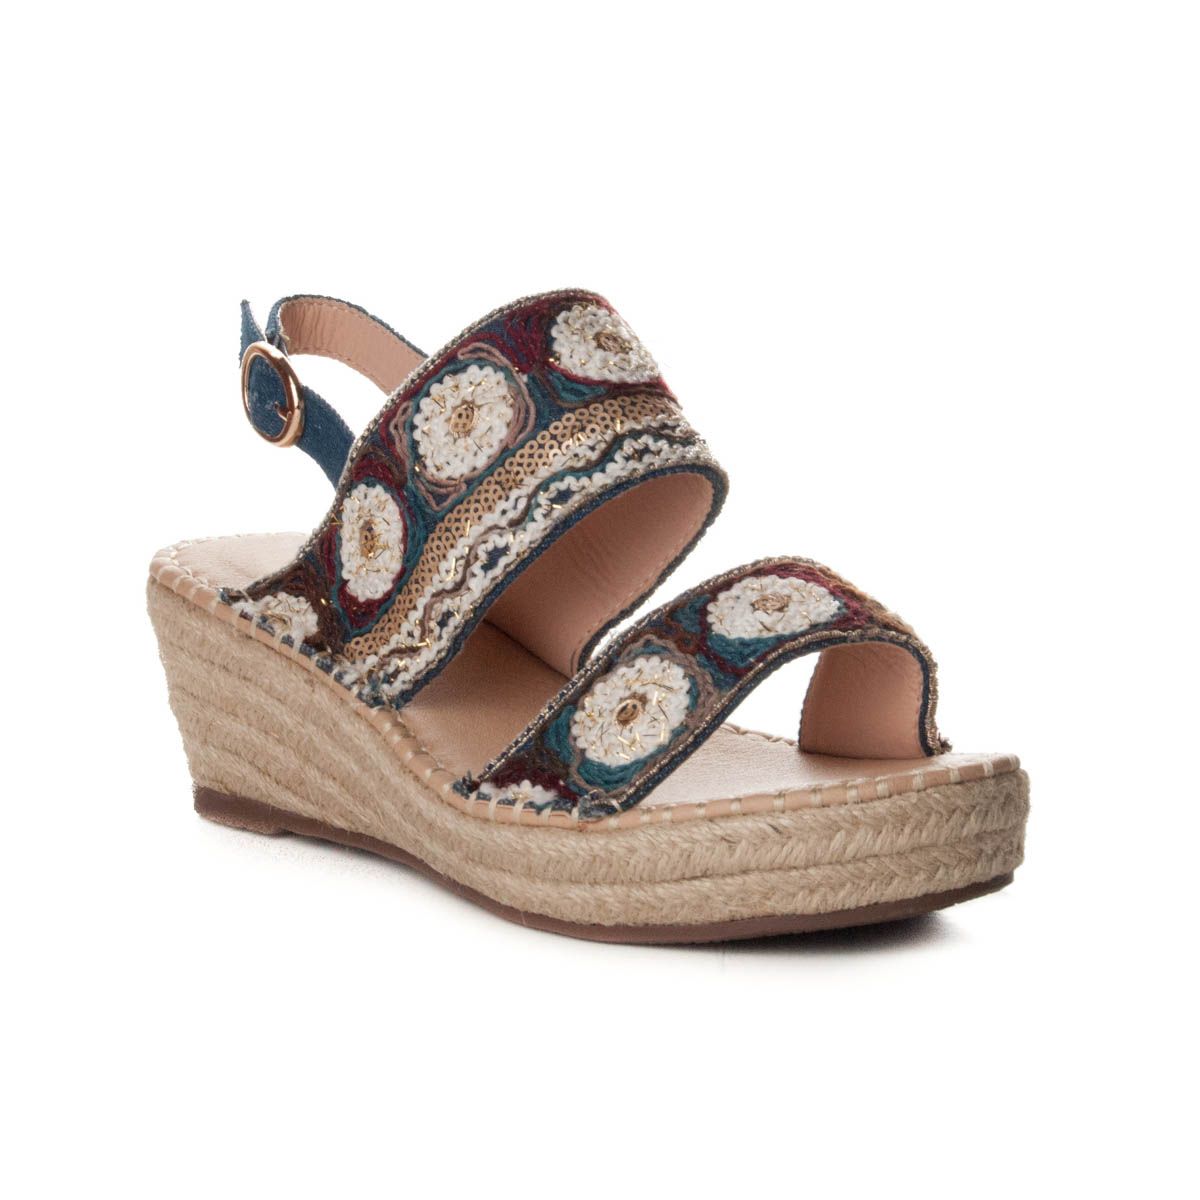 Wedge of esparto. Very comfortable. Style by his elabration in Sparte, and his ethnic style decoration. Very current.